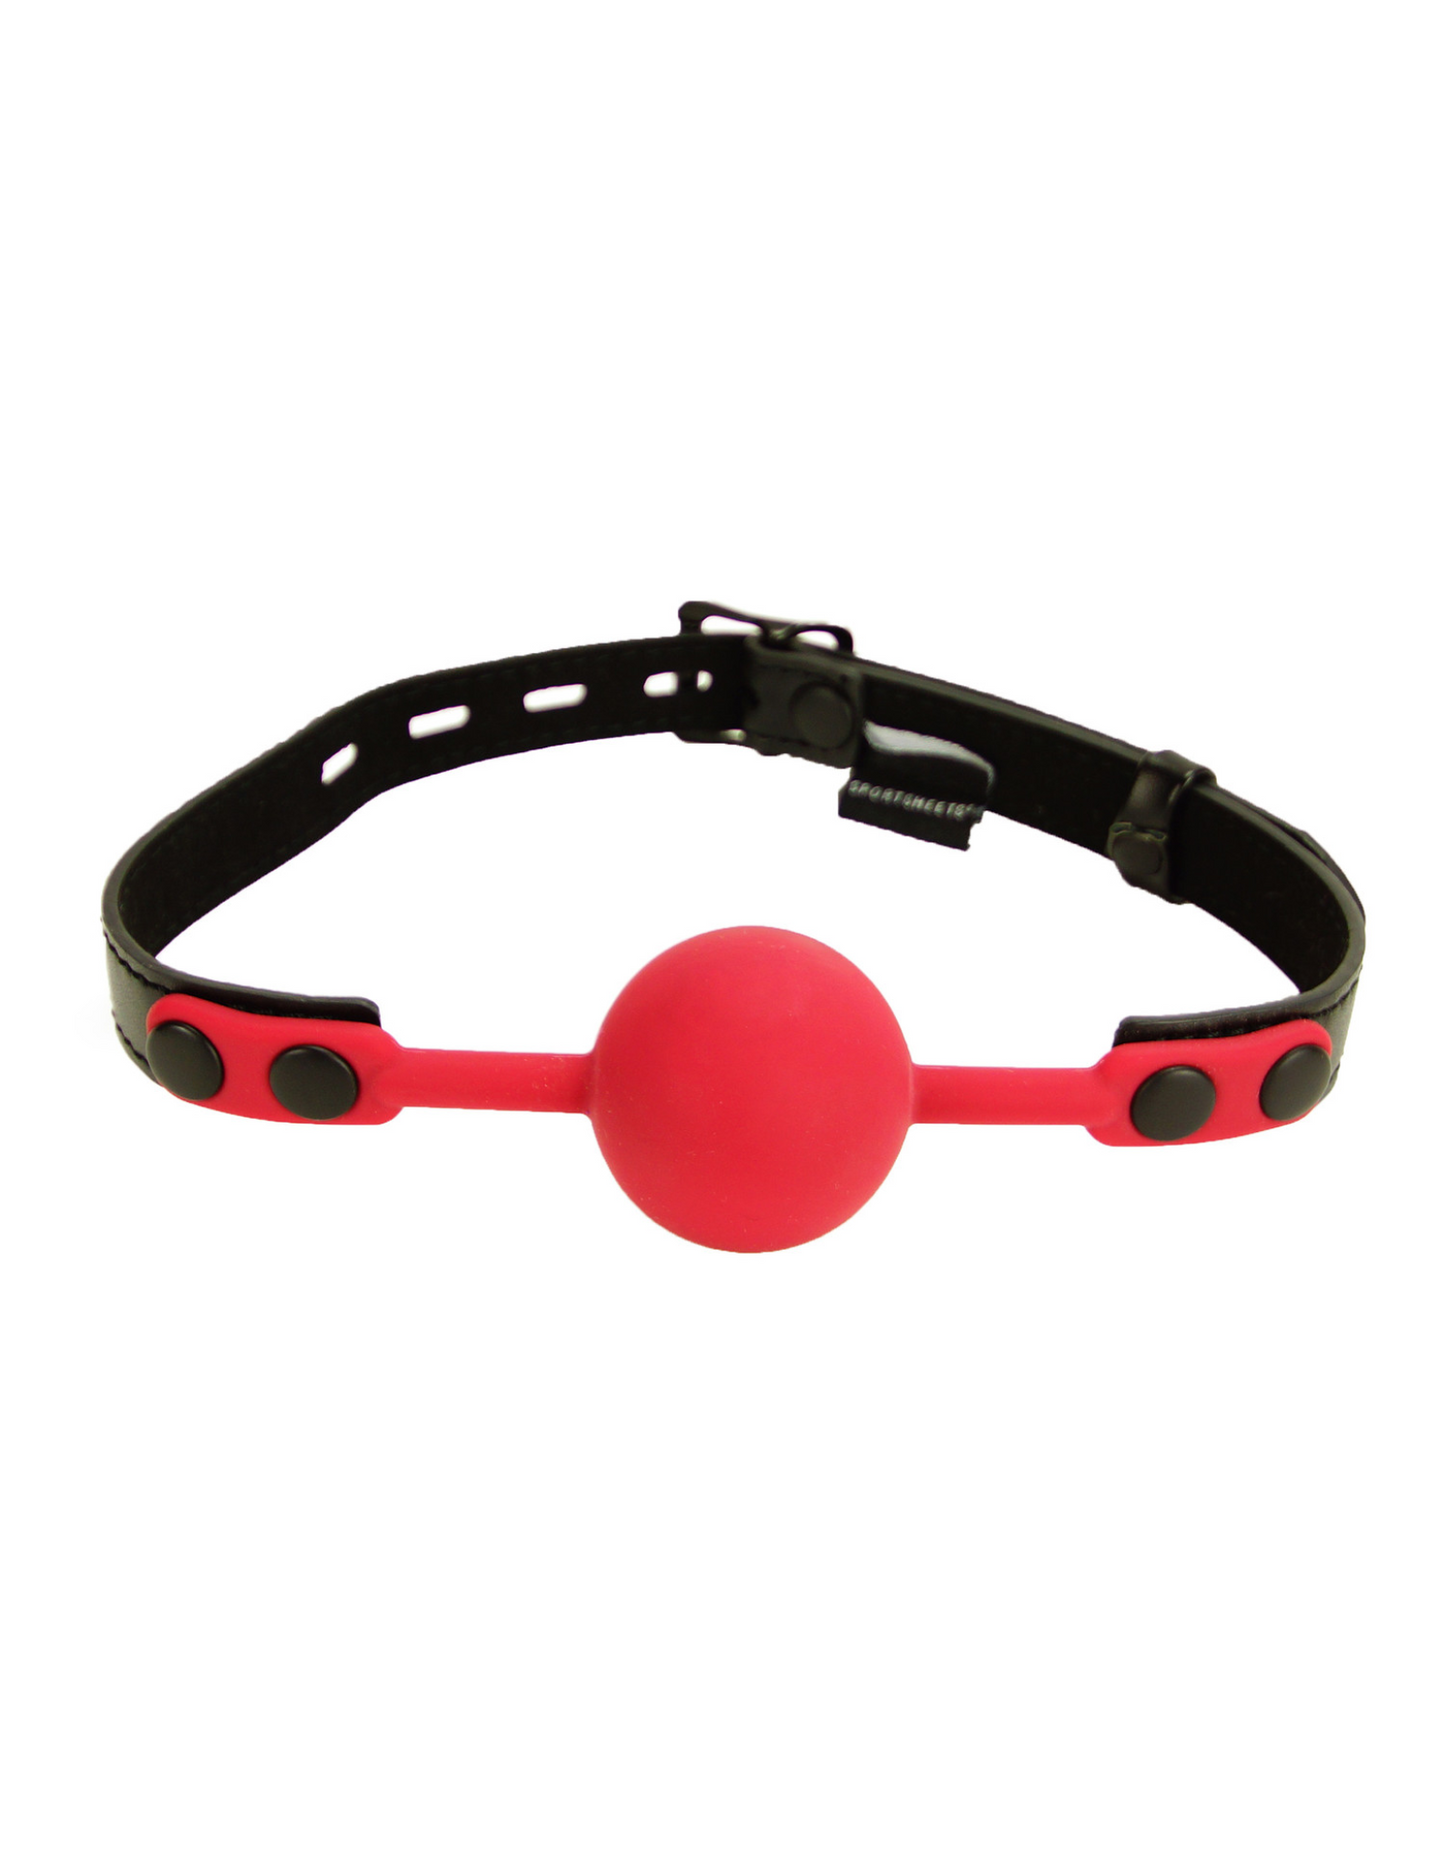 Front view of the red ball gag shows its strap and hardware.